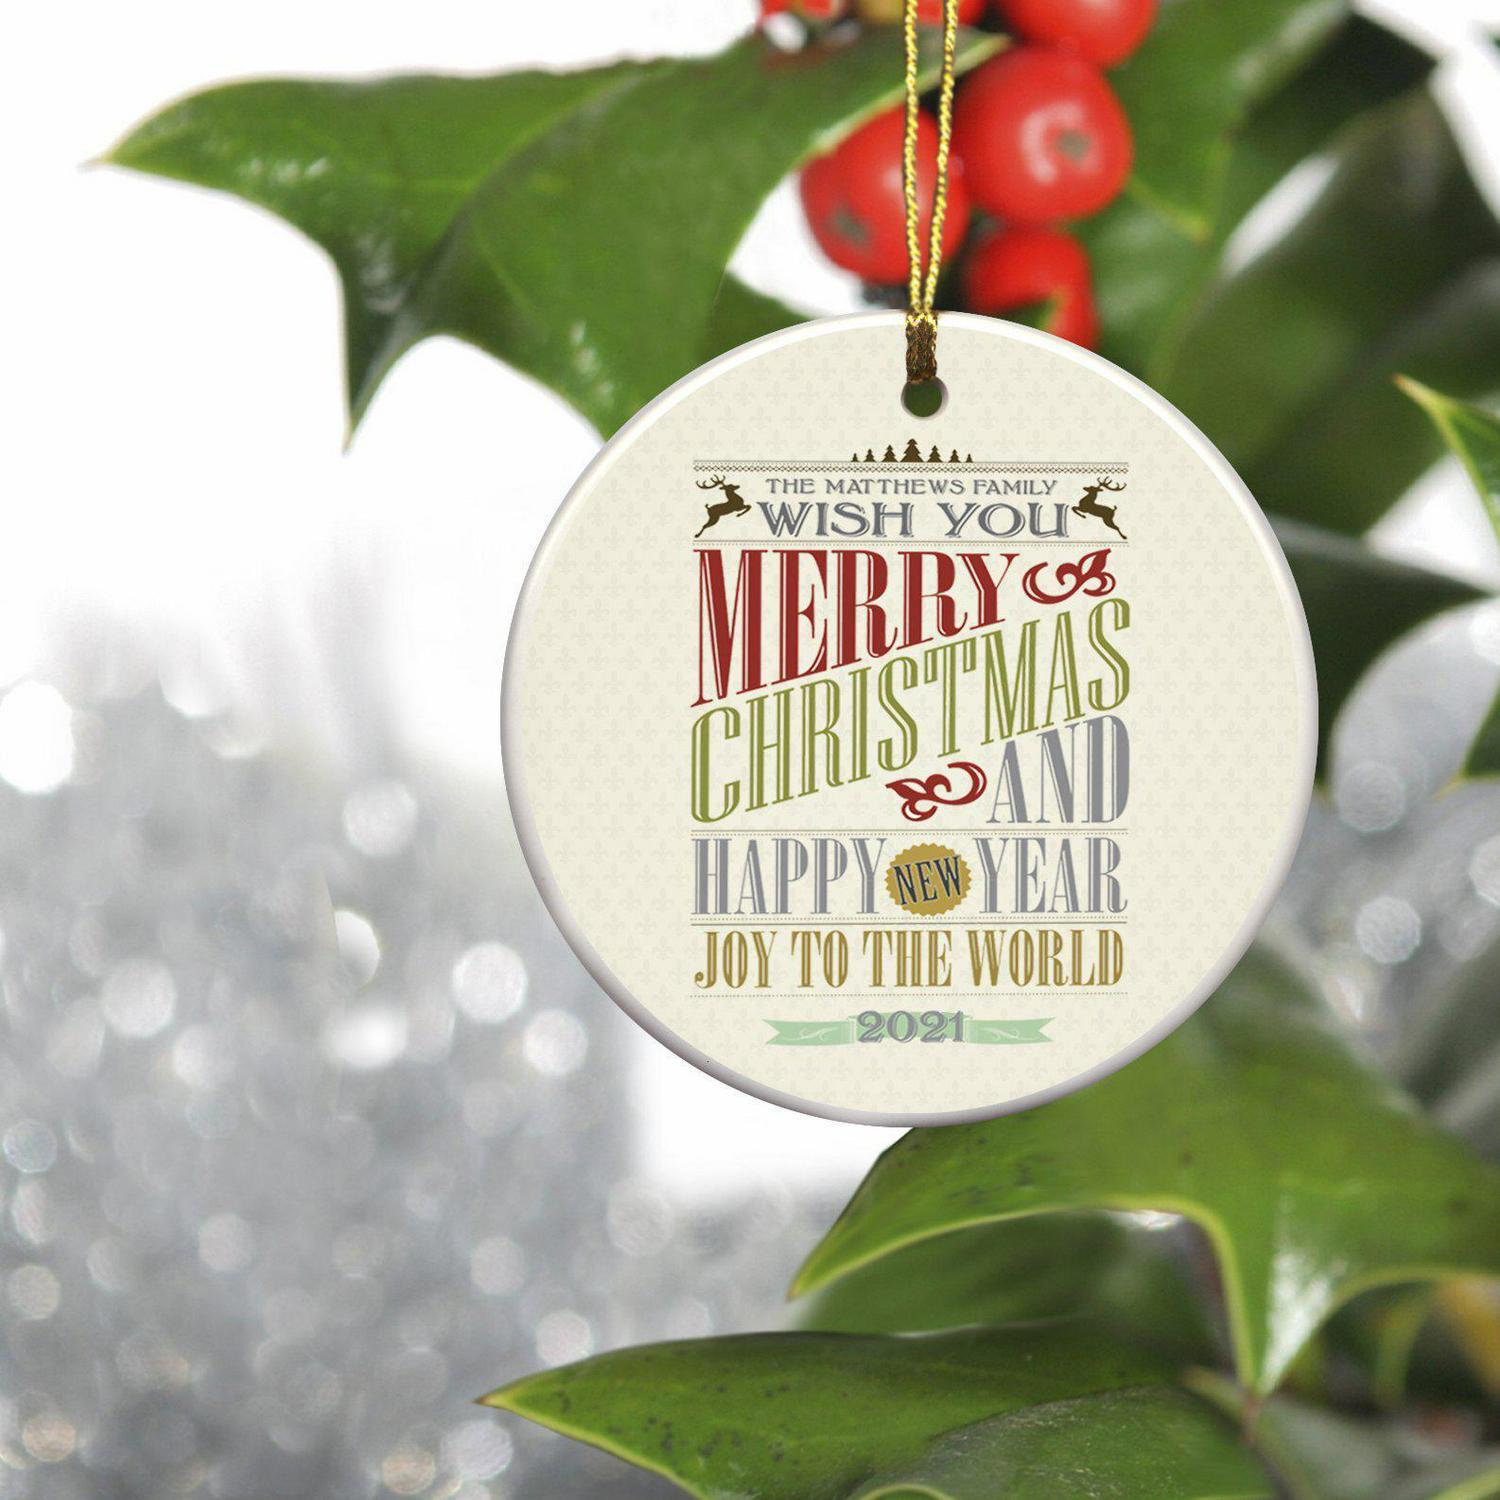 Personalized Vintage Christmas Ornaments - All